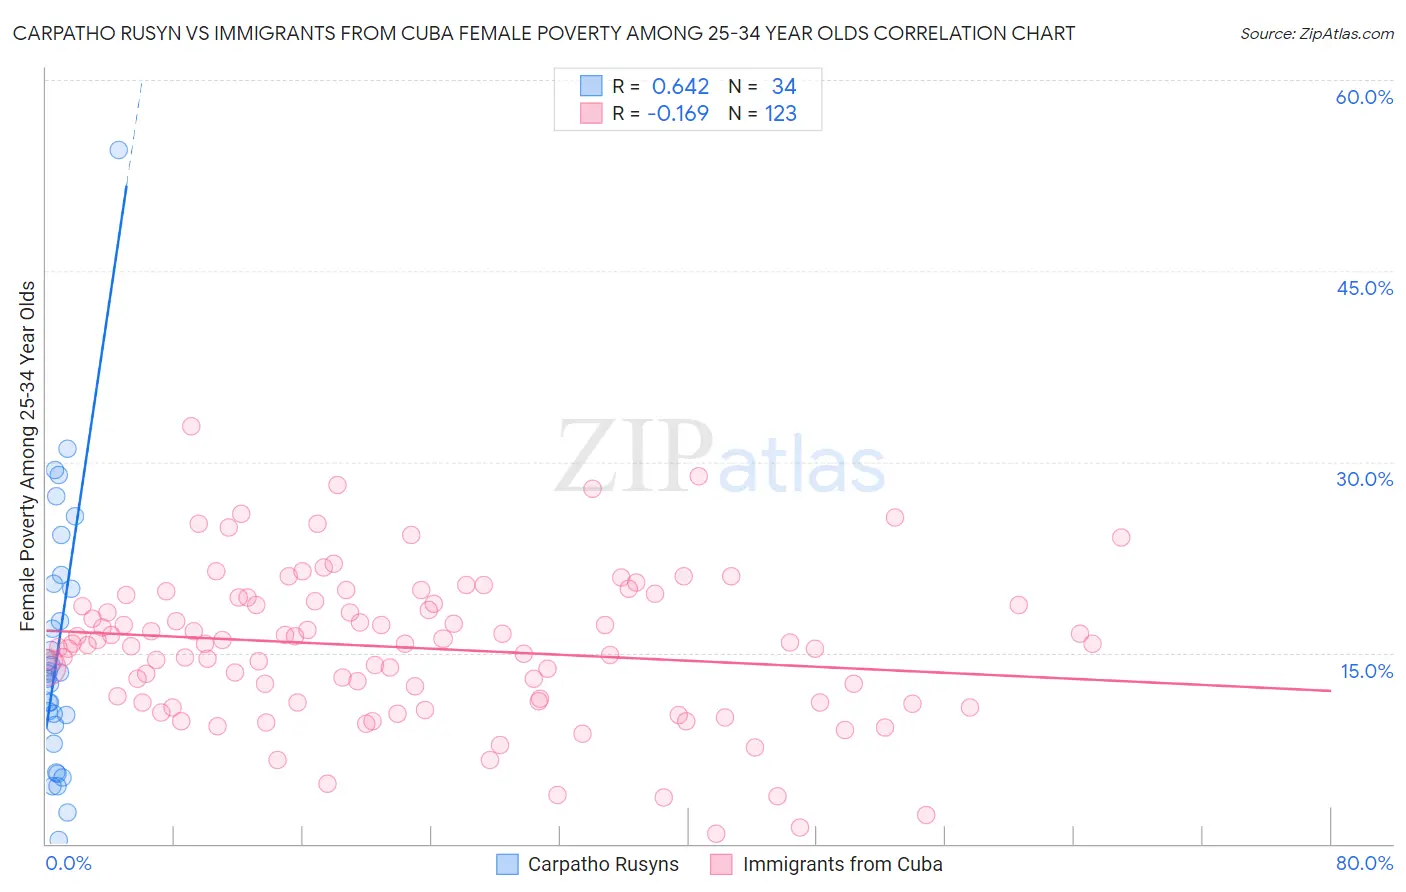 Carpatho Rusyn vs Immigrants from Cuba Female Poverty Among 25-34 Year Olds